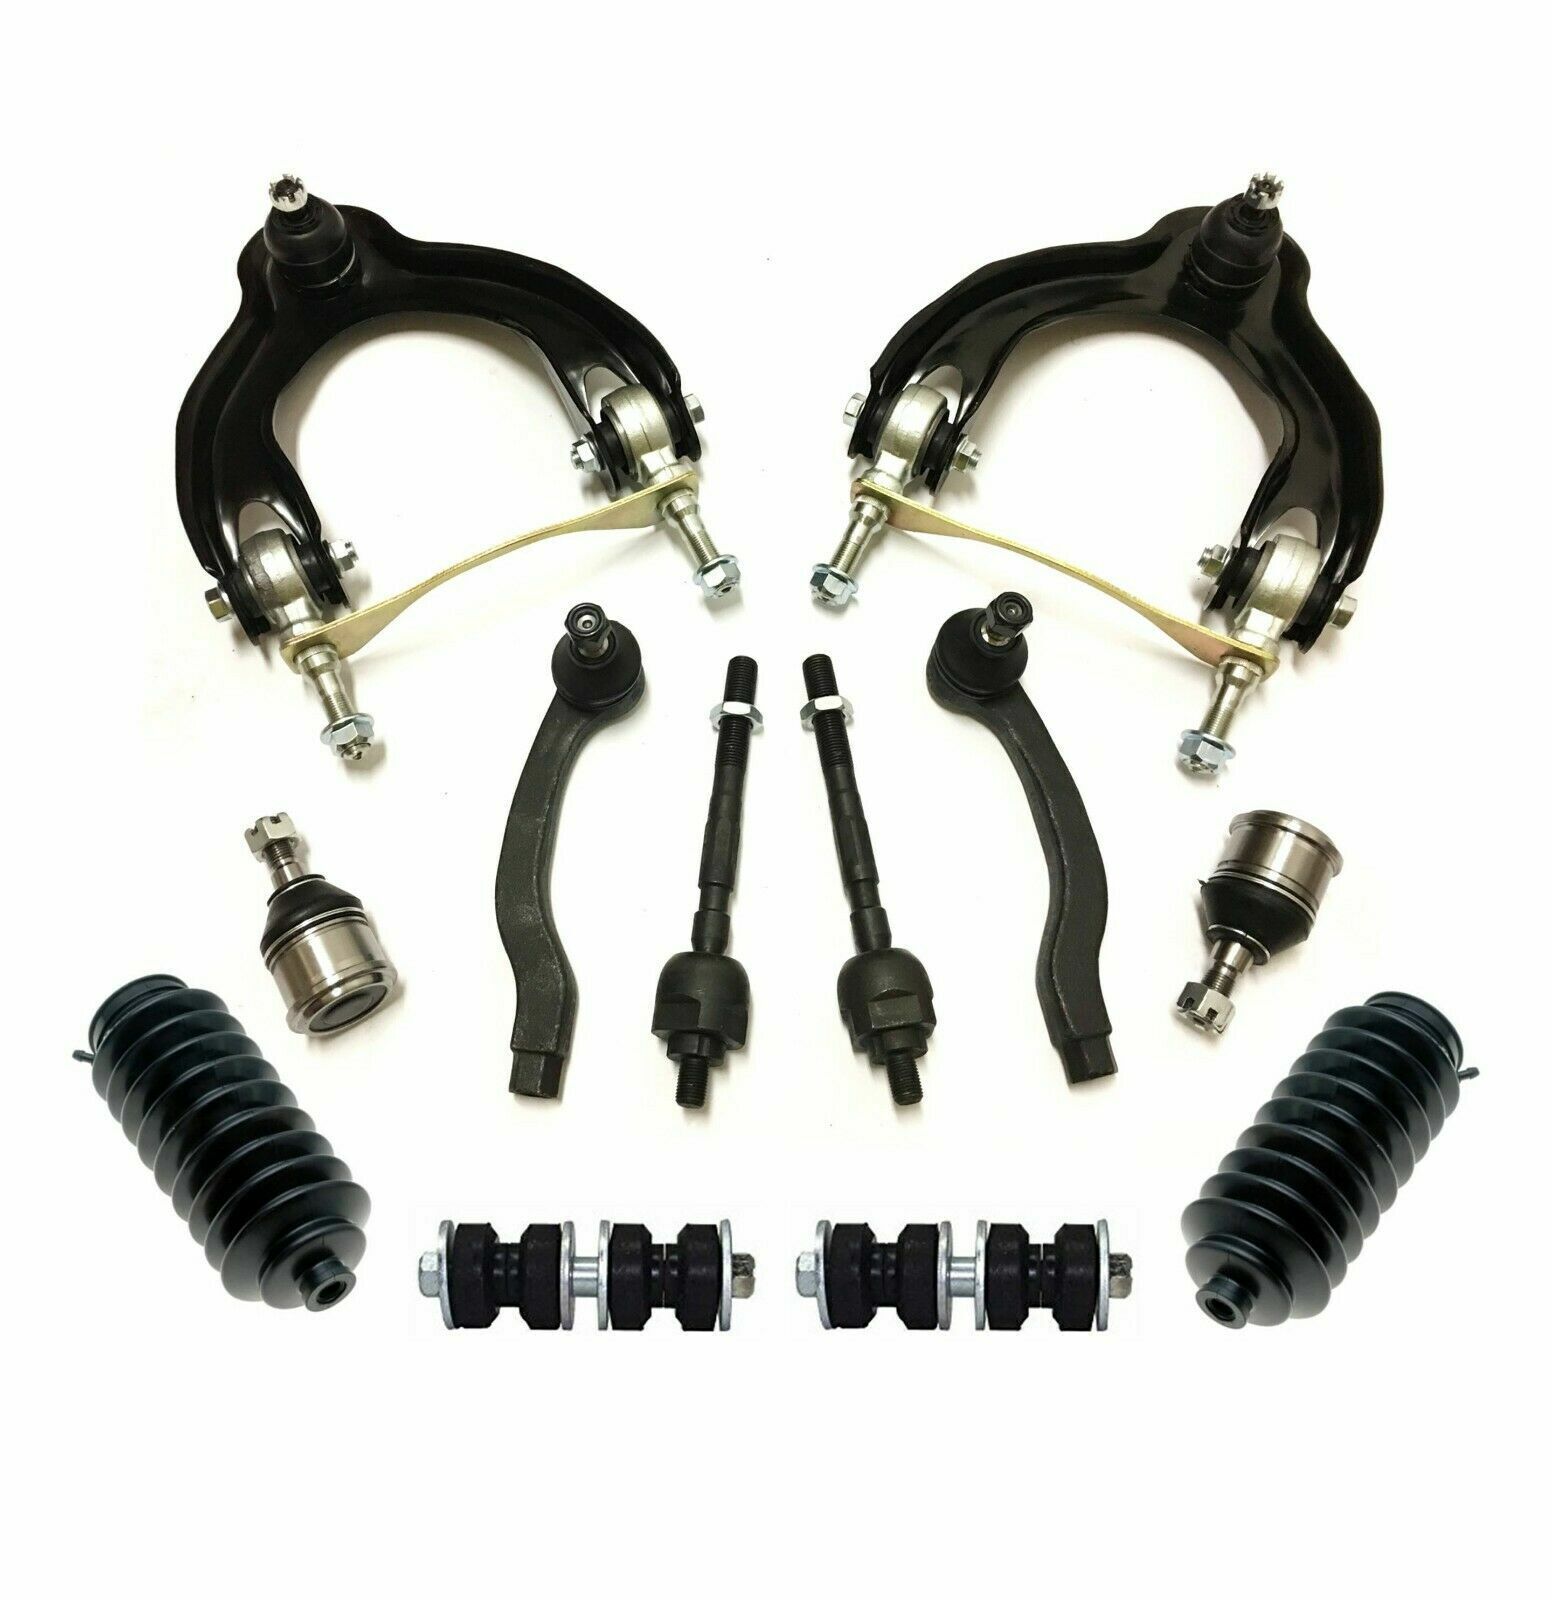 12 Pc New Front Suspension Kit for Acura Integra Honda Civic Upper Control Arms